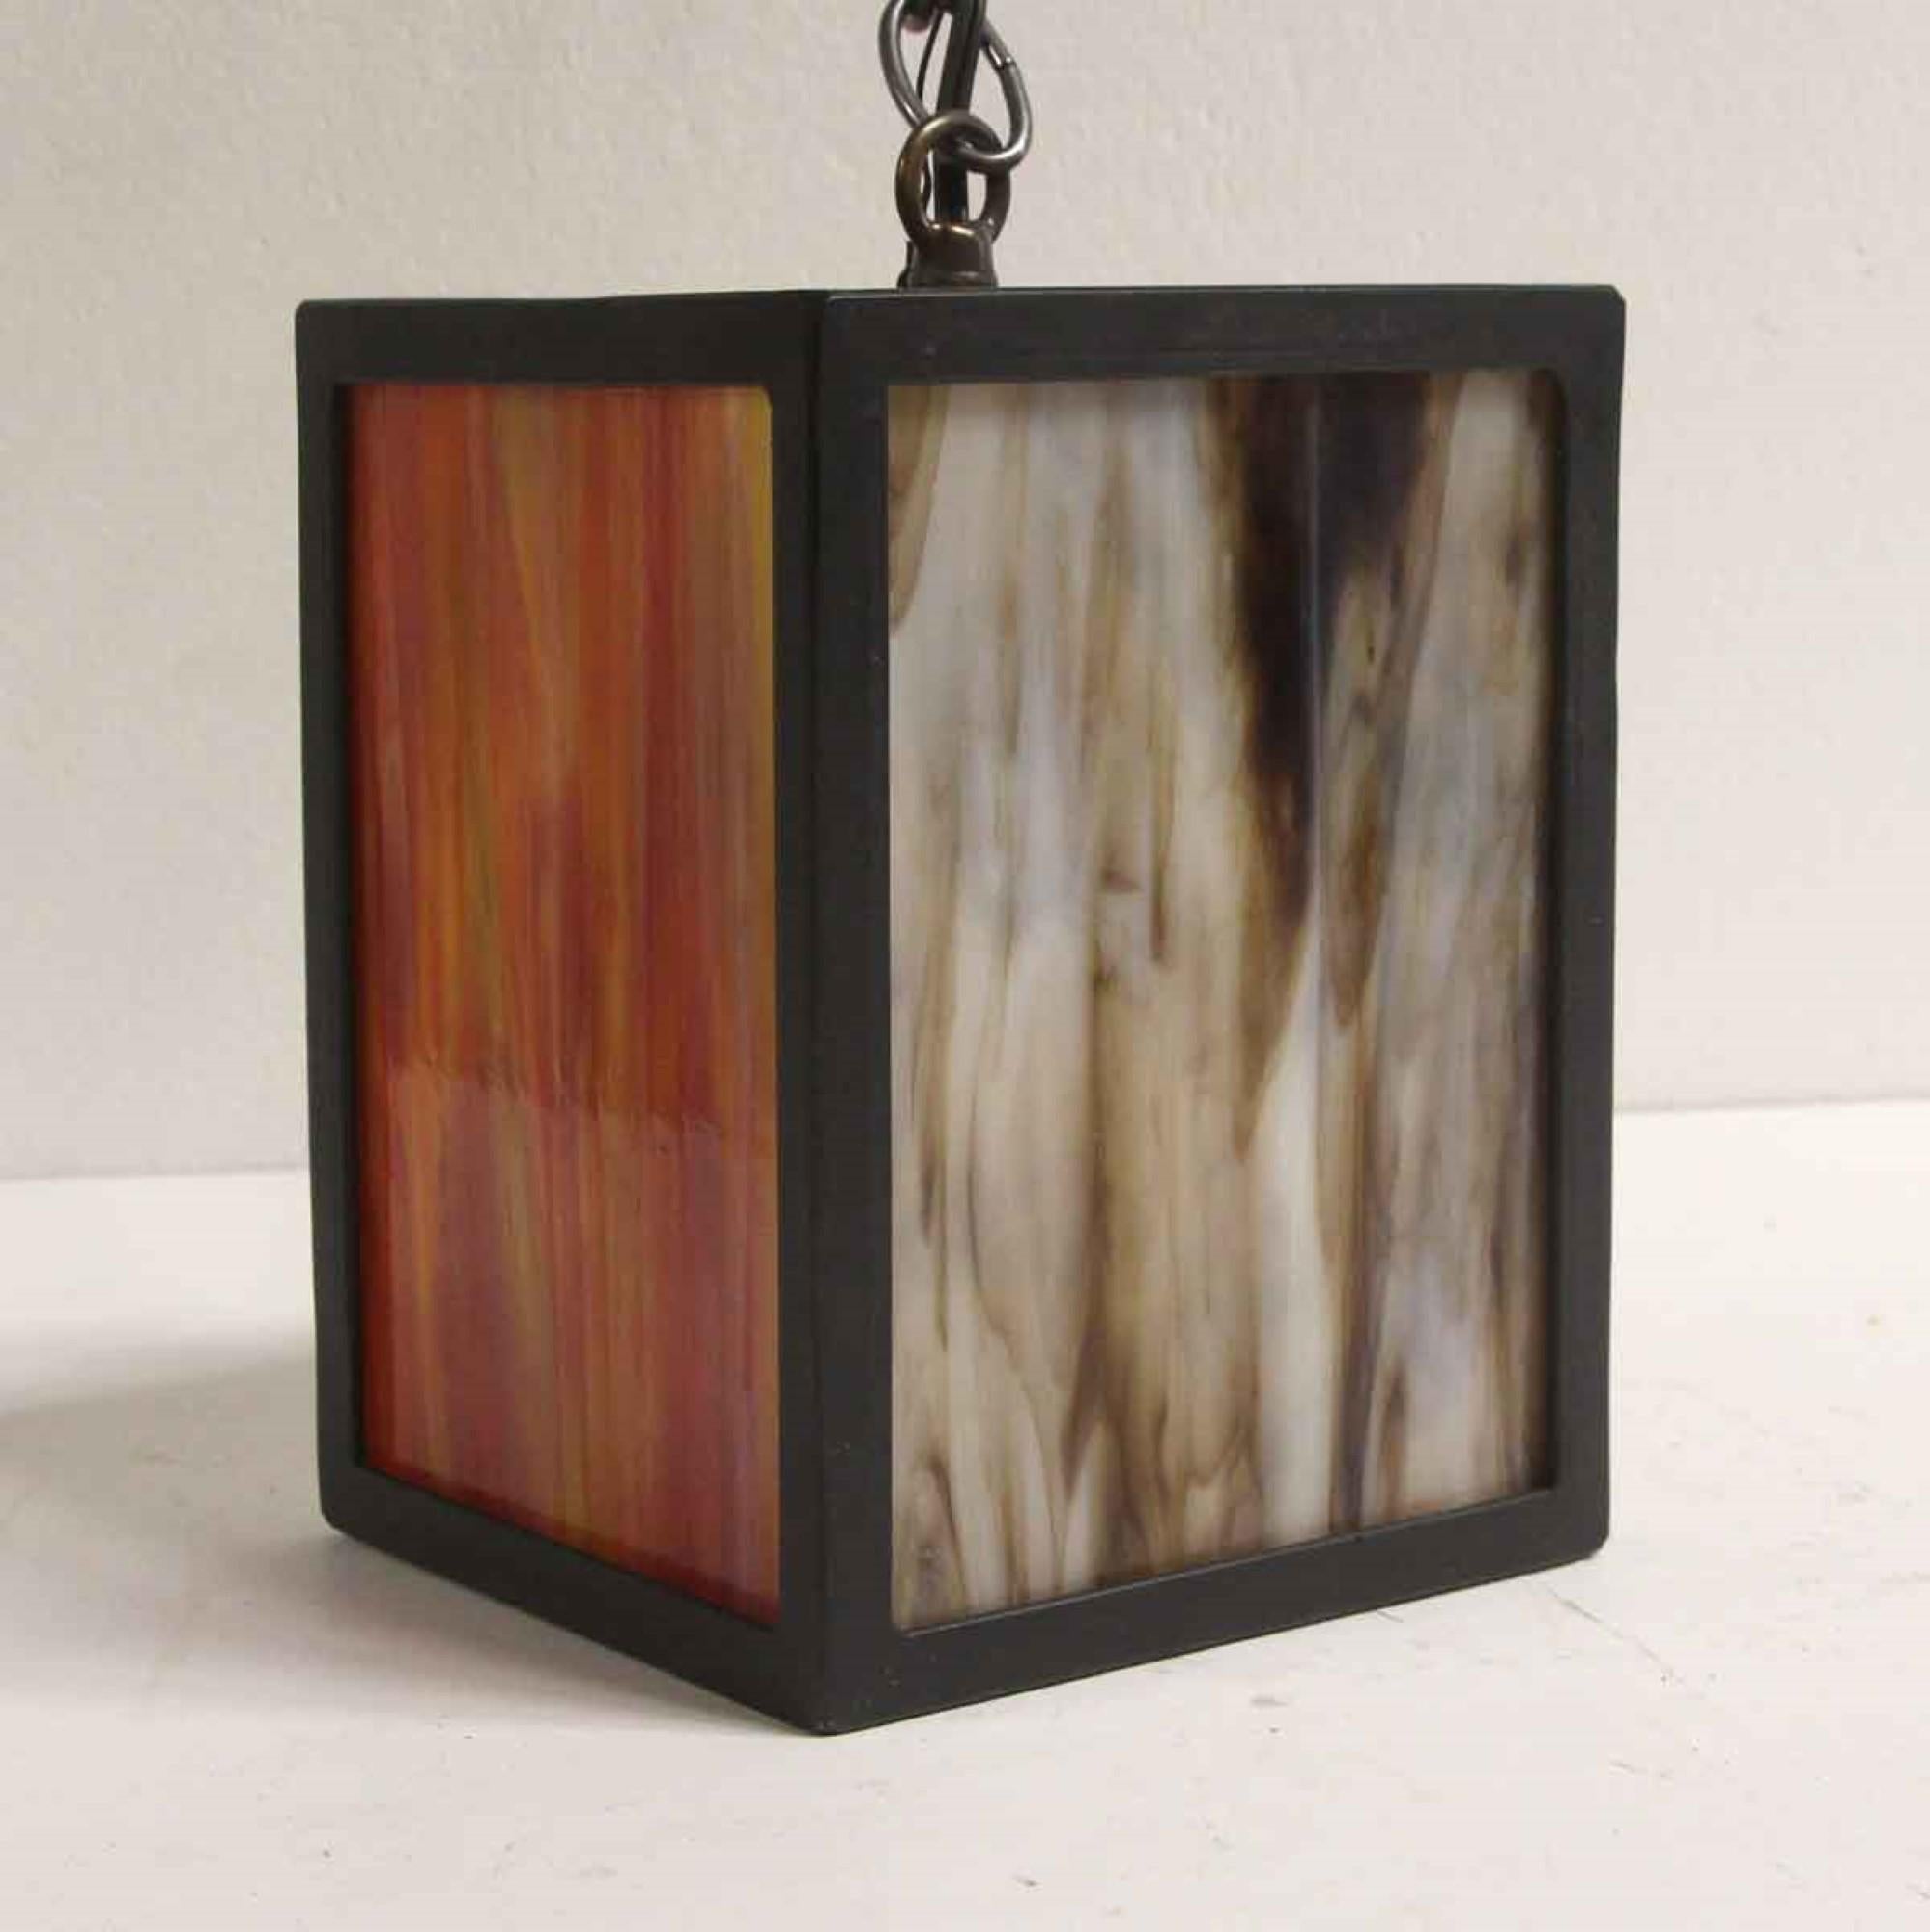  2000s Stained Glass Lantern Pendant Light with Iron Frame Mid-Century Modern 1